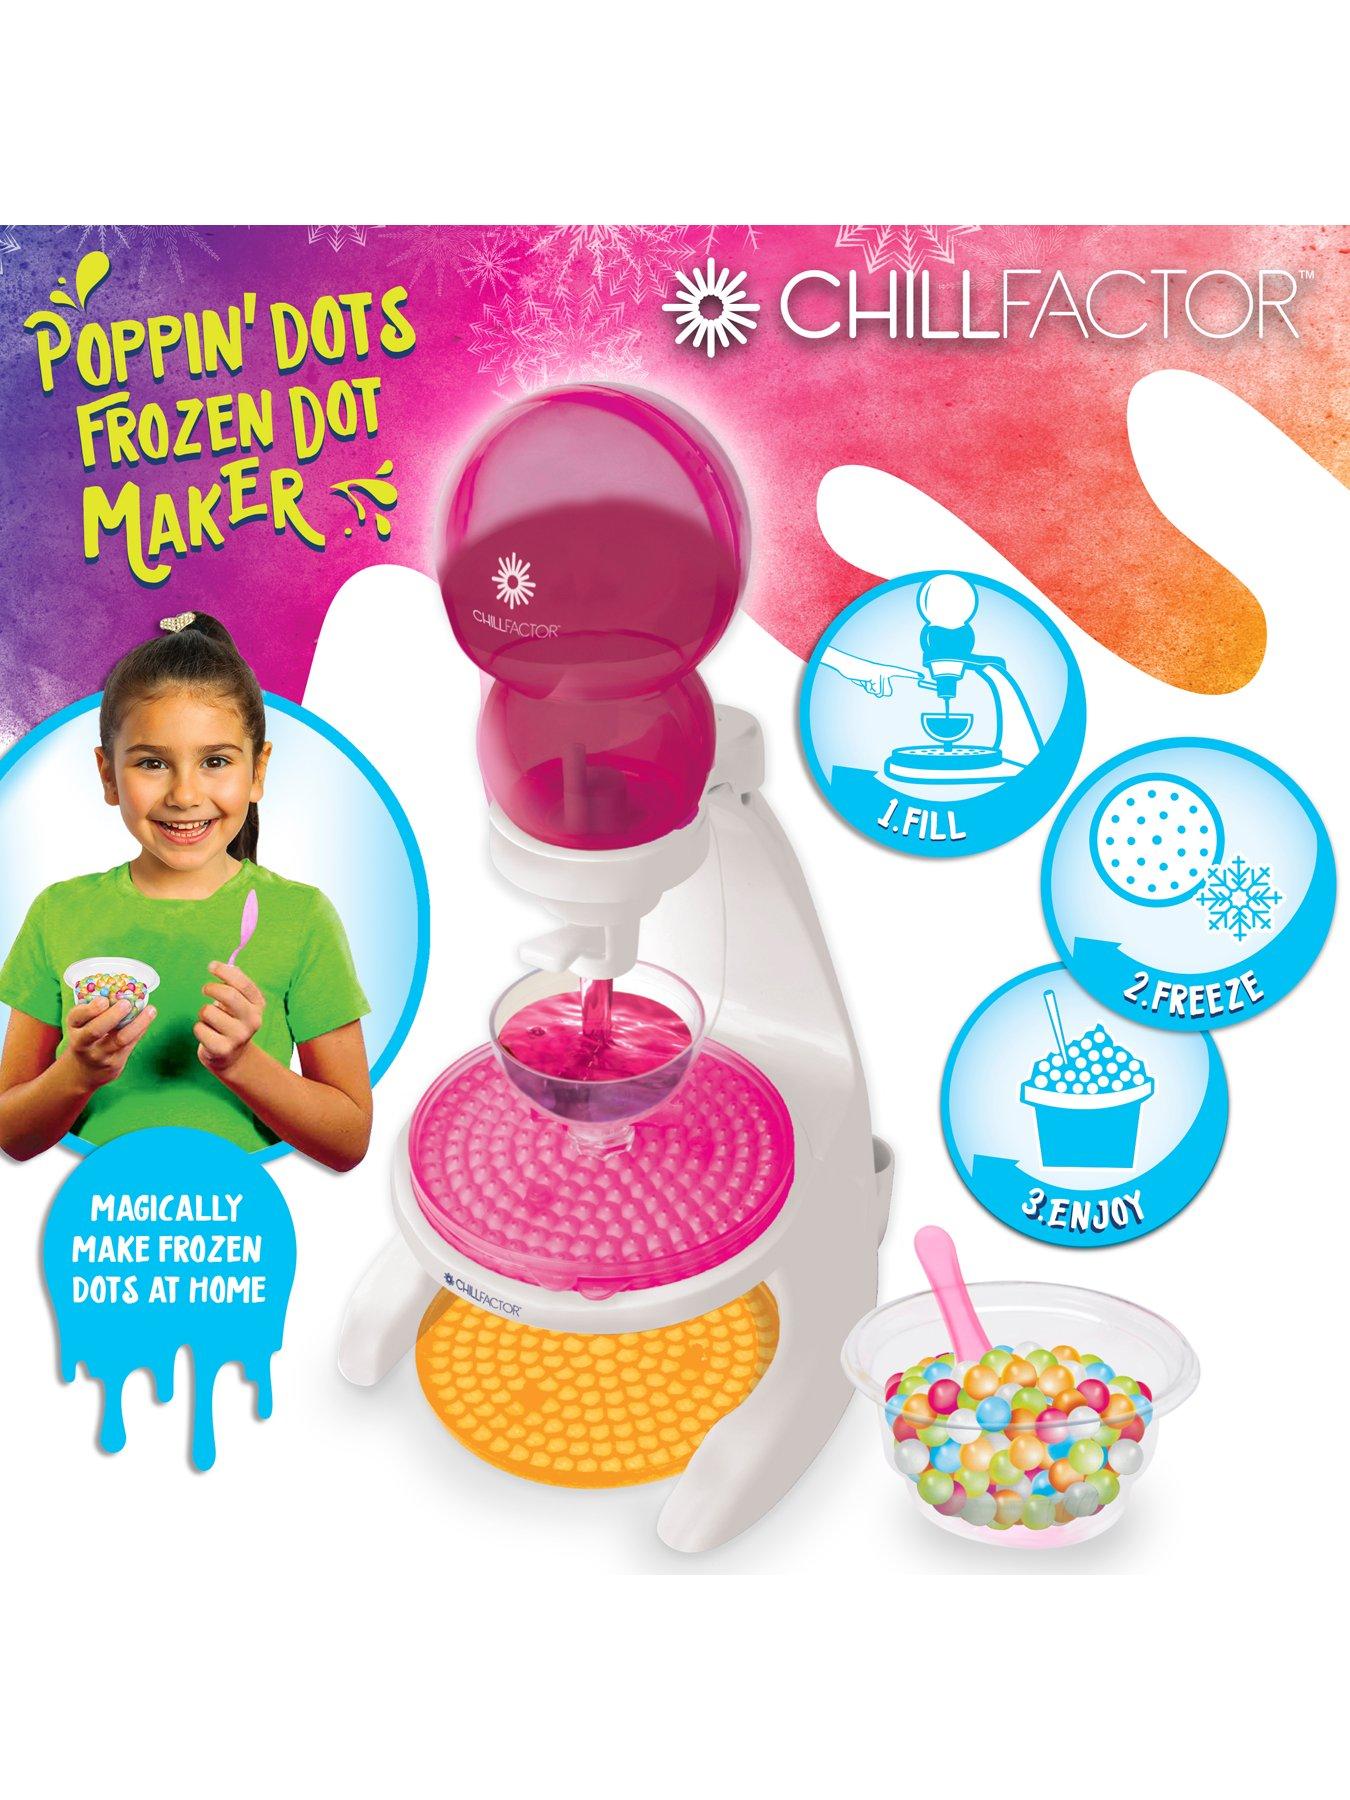  Dippin Dots Frozen Dot Maker, Includes maker, 6 trays, 4 bowls,  4 spoons, 2 pop pens, Instructions, Enjoy Dippin Dots at home, Use any  soda, juice or milk, Freezes in 2